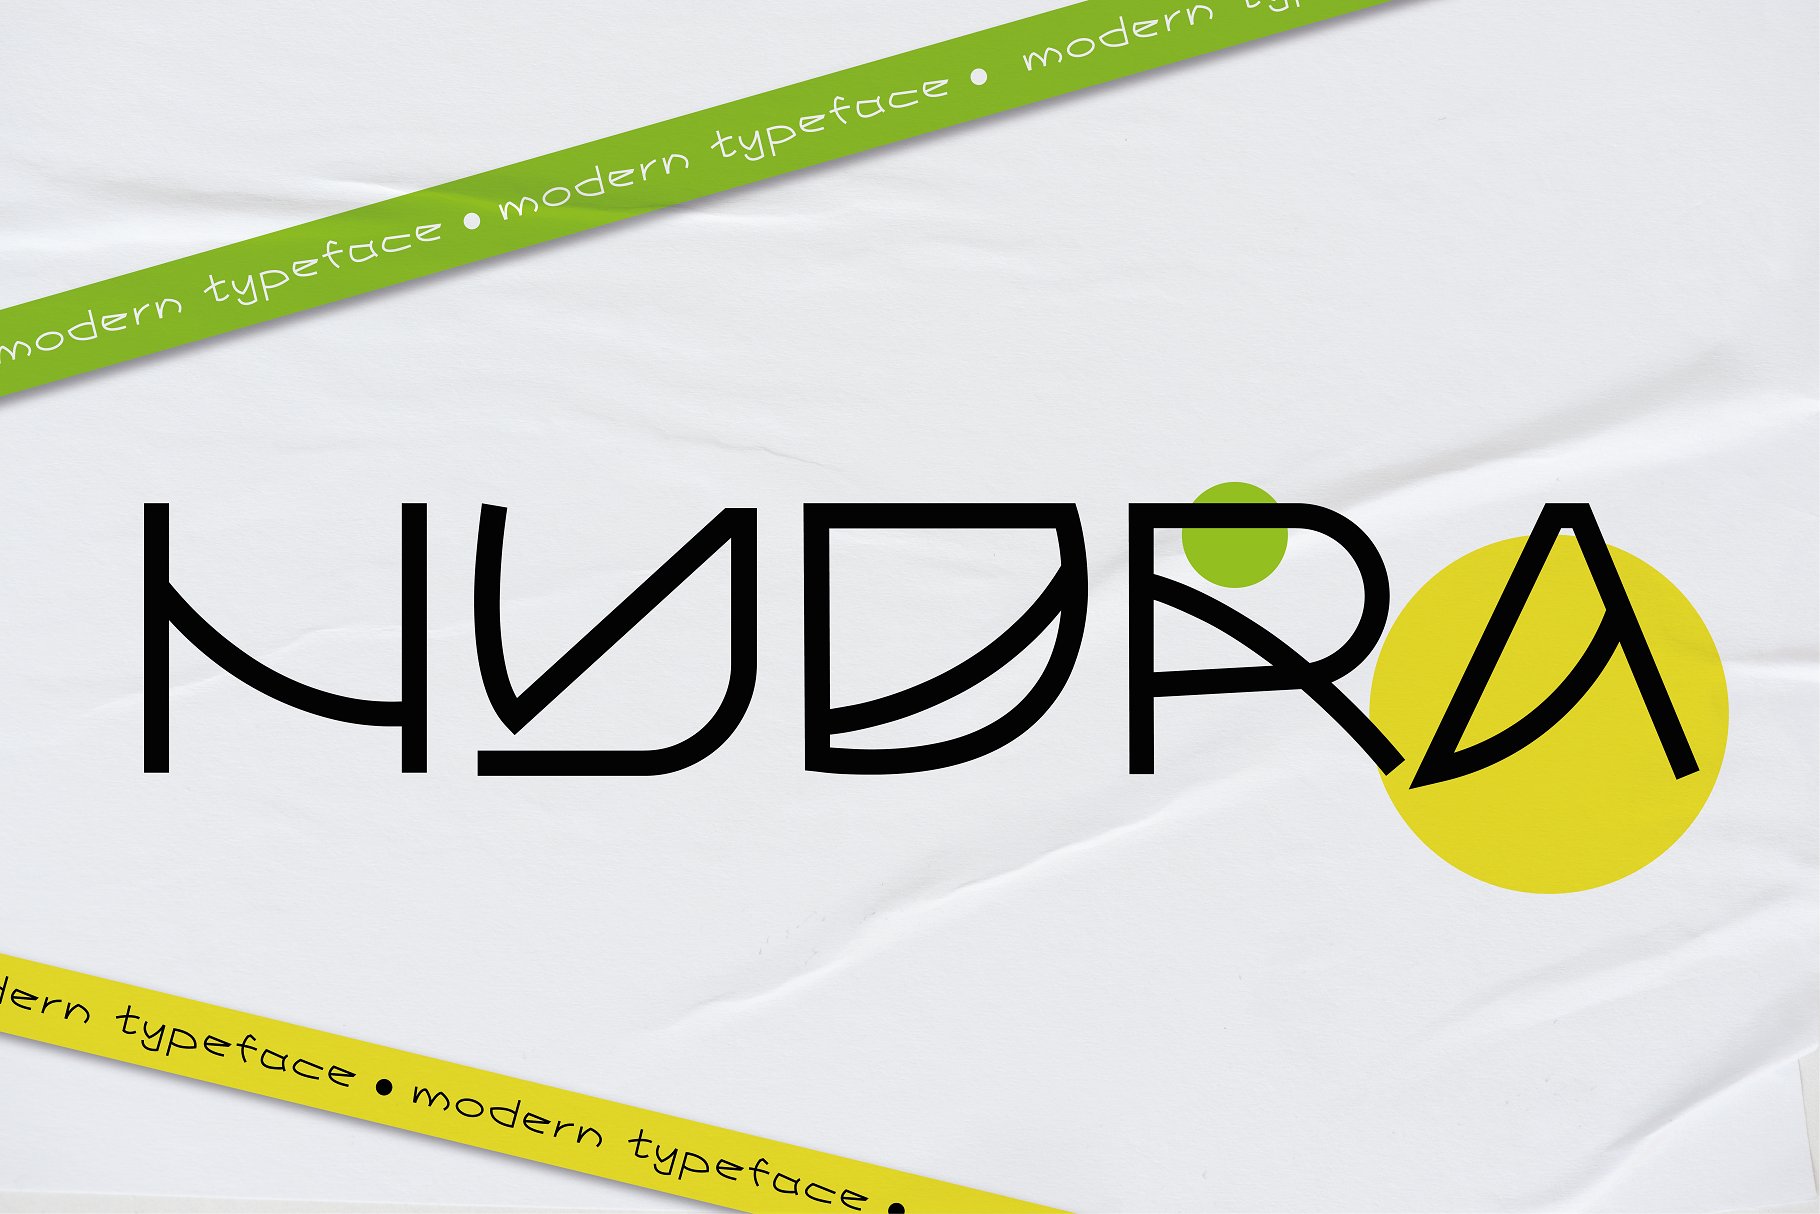 Hydra - Experimental Typeface cover image.